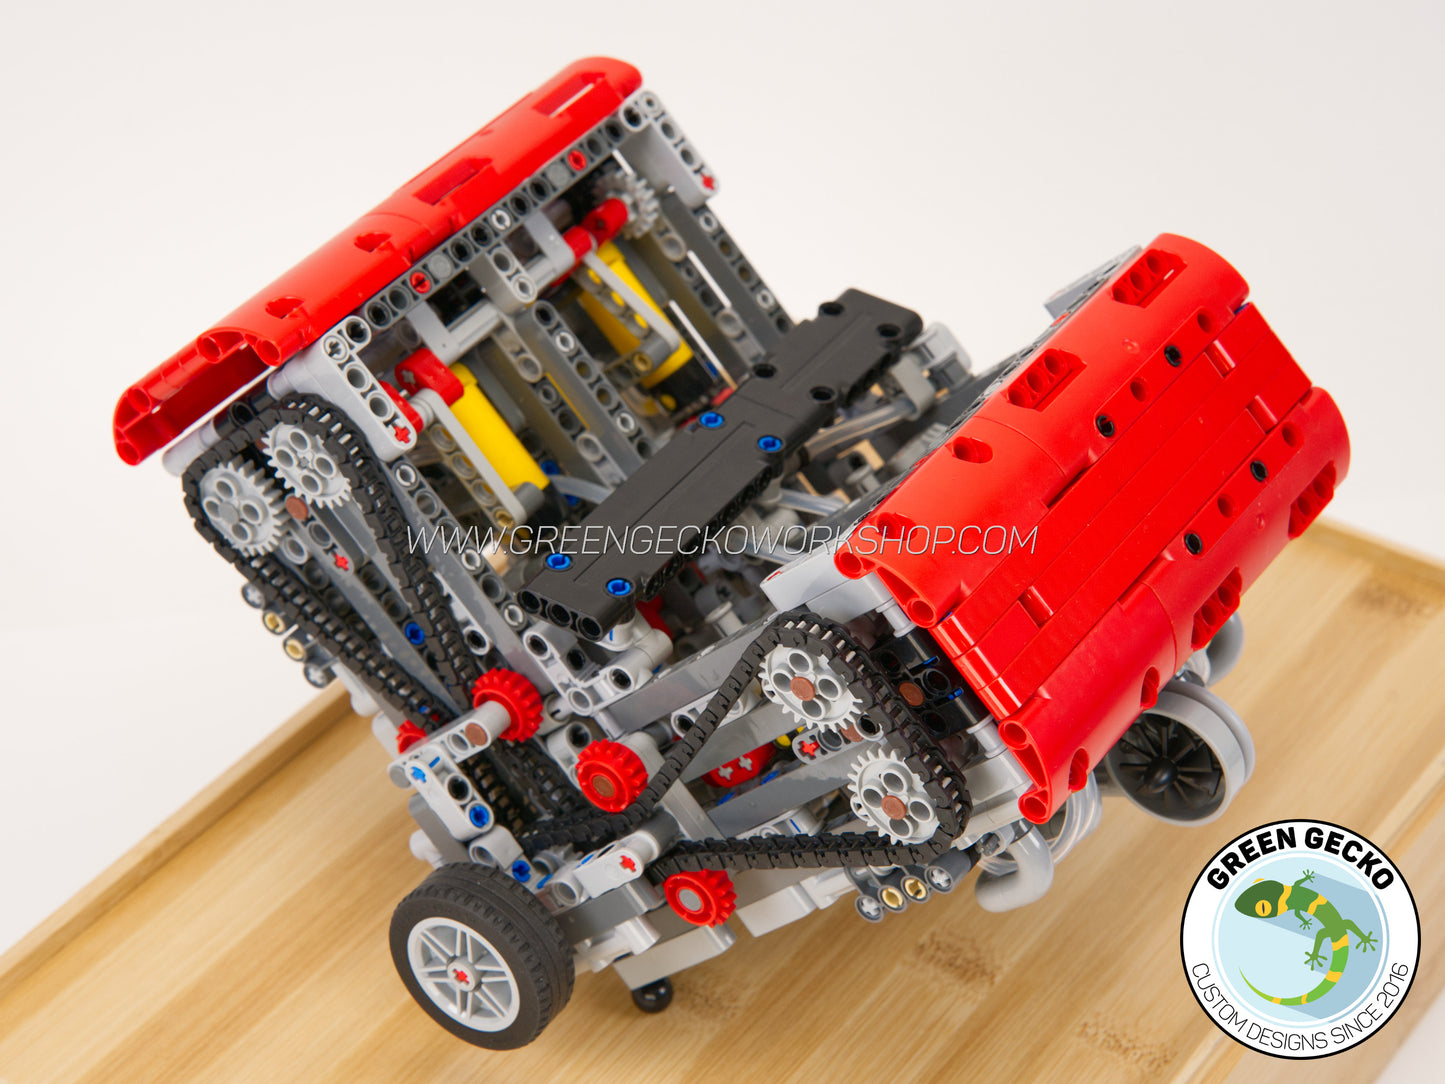 Complete Kit - MK4 V8 Twin Turbo Lego Pneumatic Engine - Switchless 2000RPM + FREE 5 Speed Gearbox!